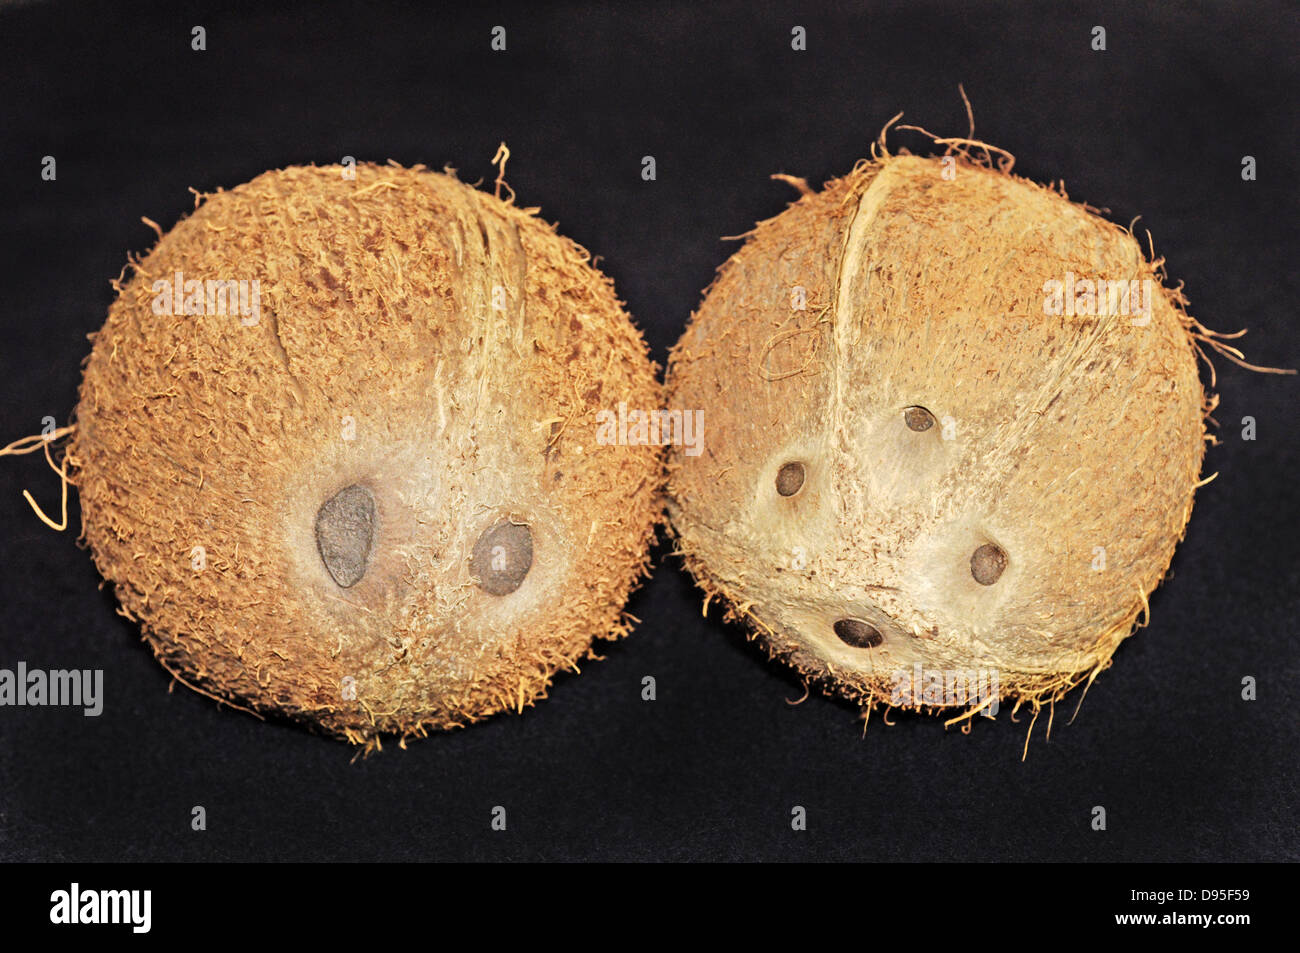 Unusual coconuts - with two and four eyes. Normally coconuts have three eyes. Stock Photo